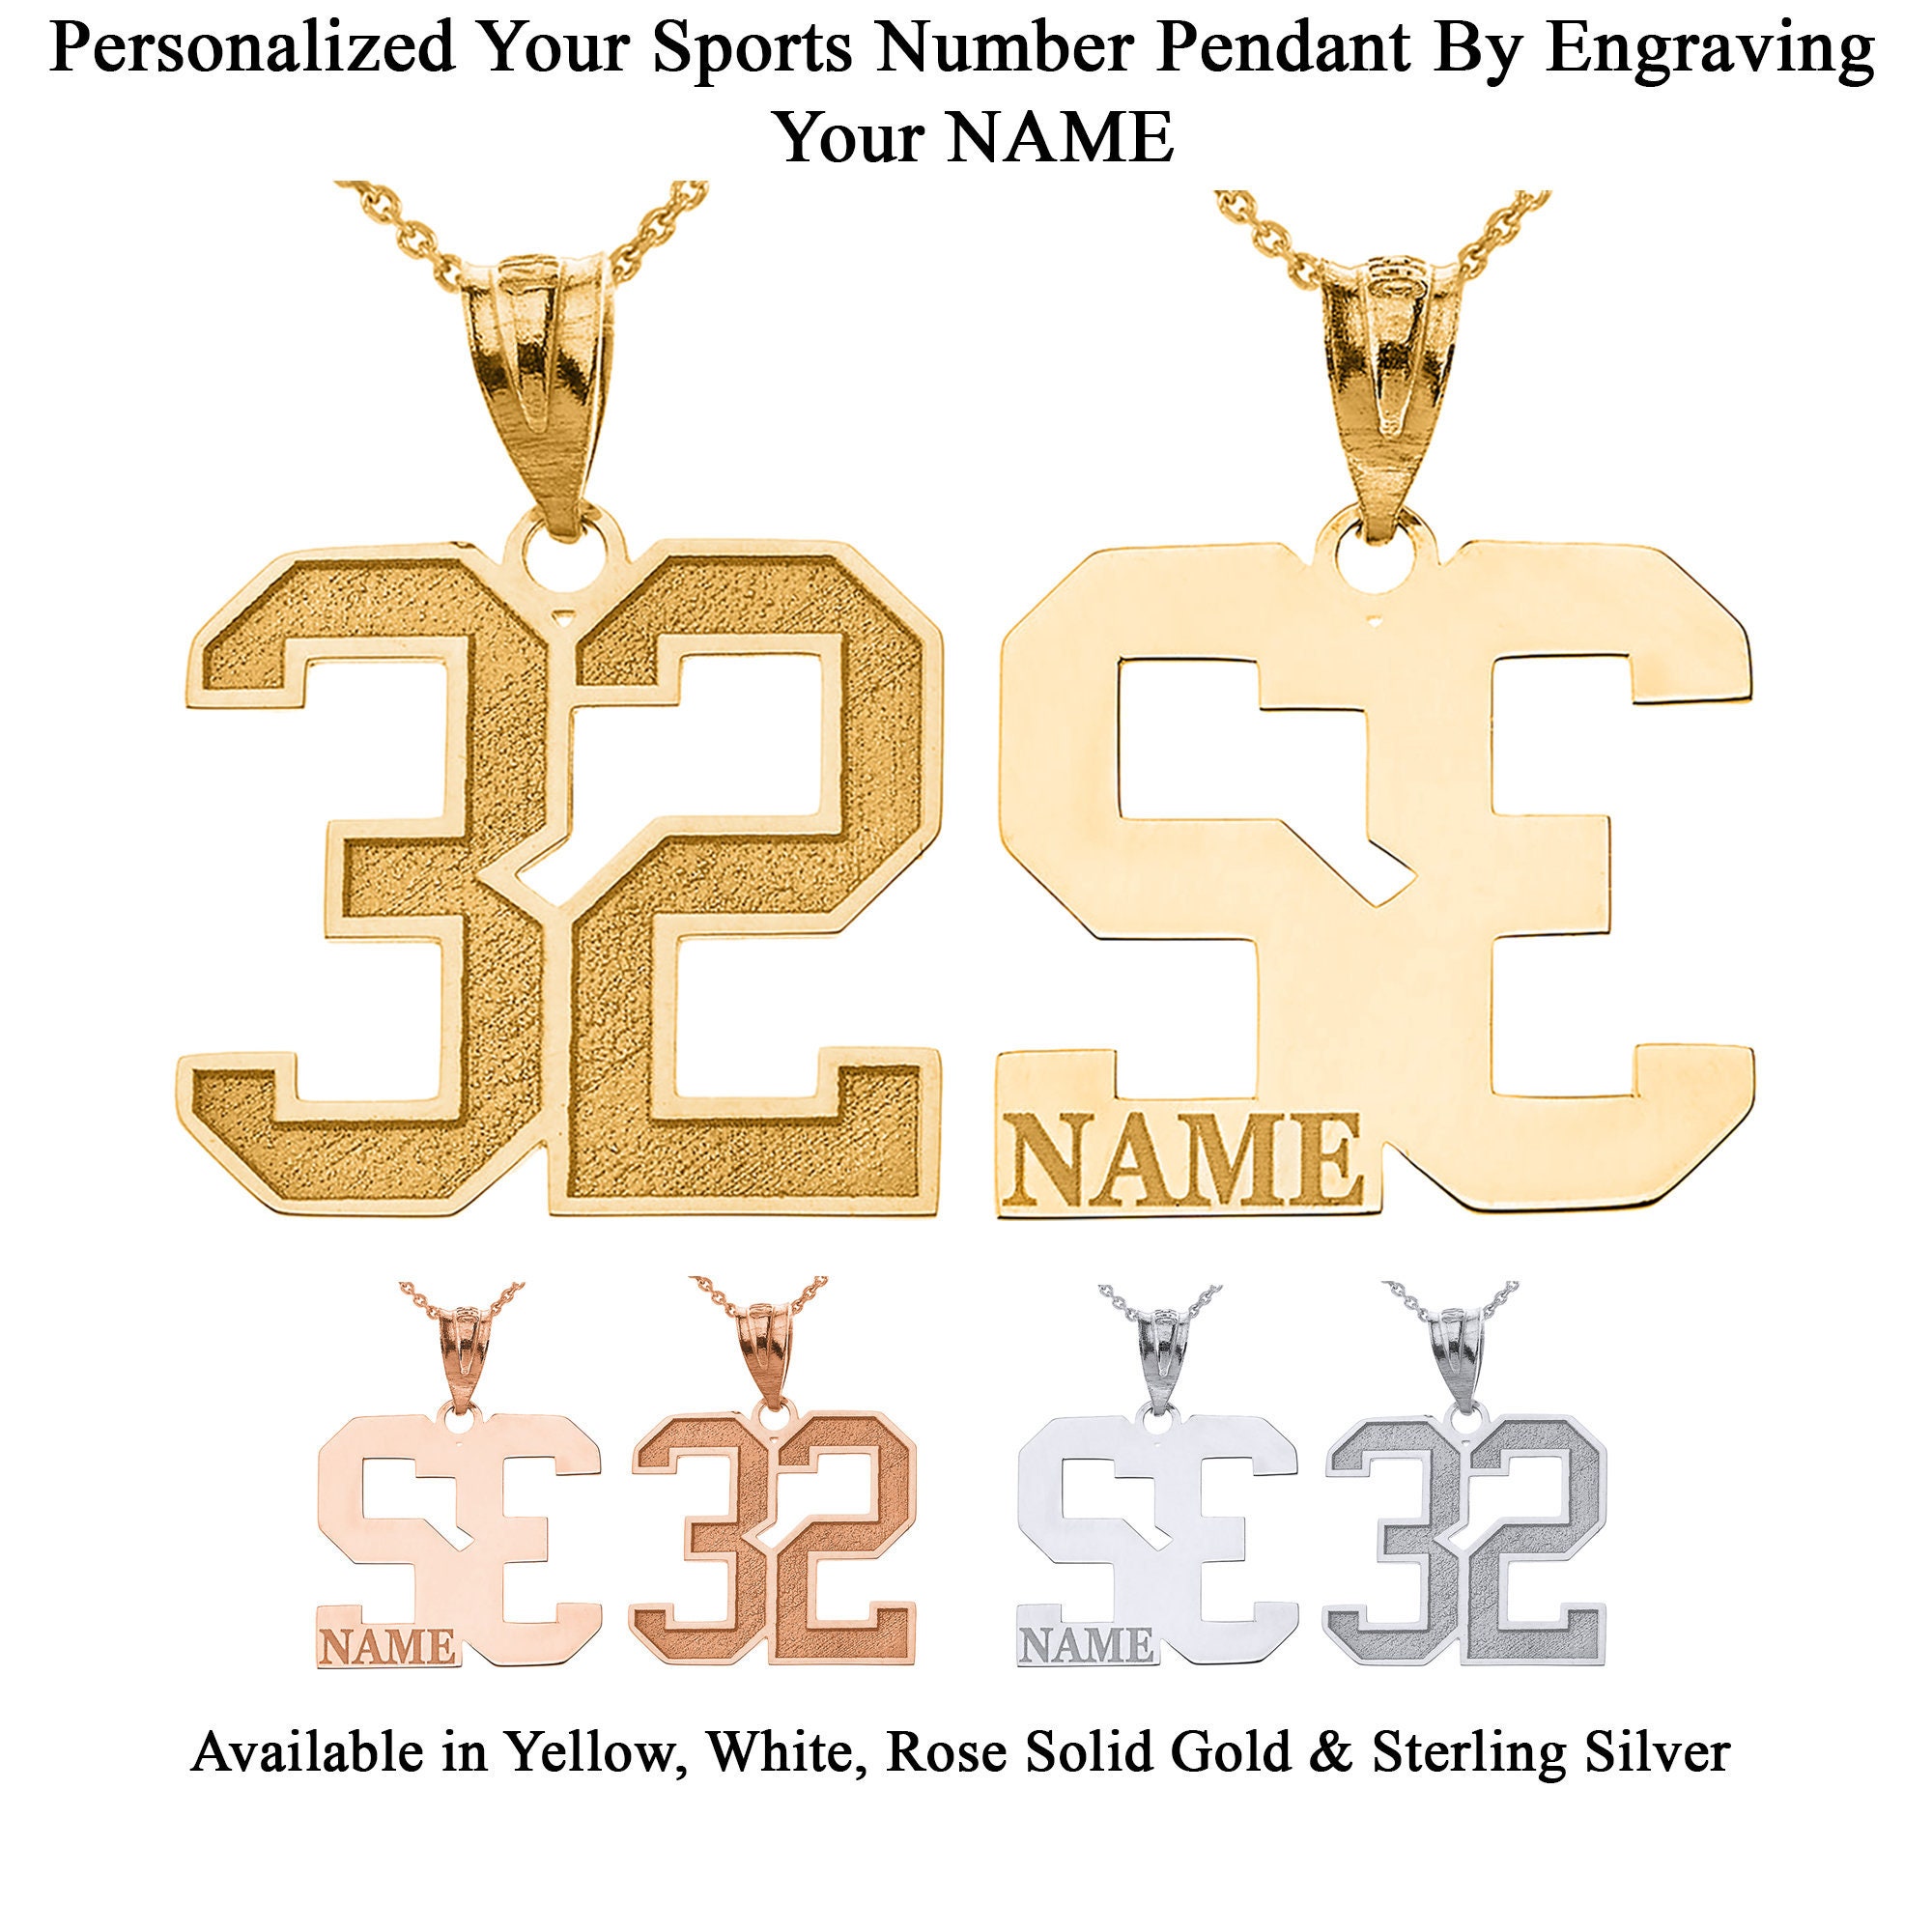 Spirit Game Day Bracelet Stack of 5 with premium quality gold